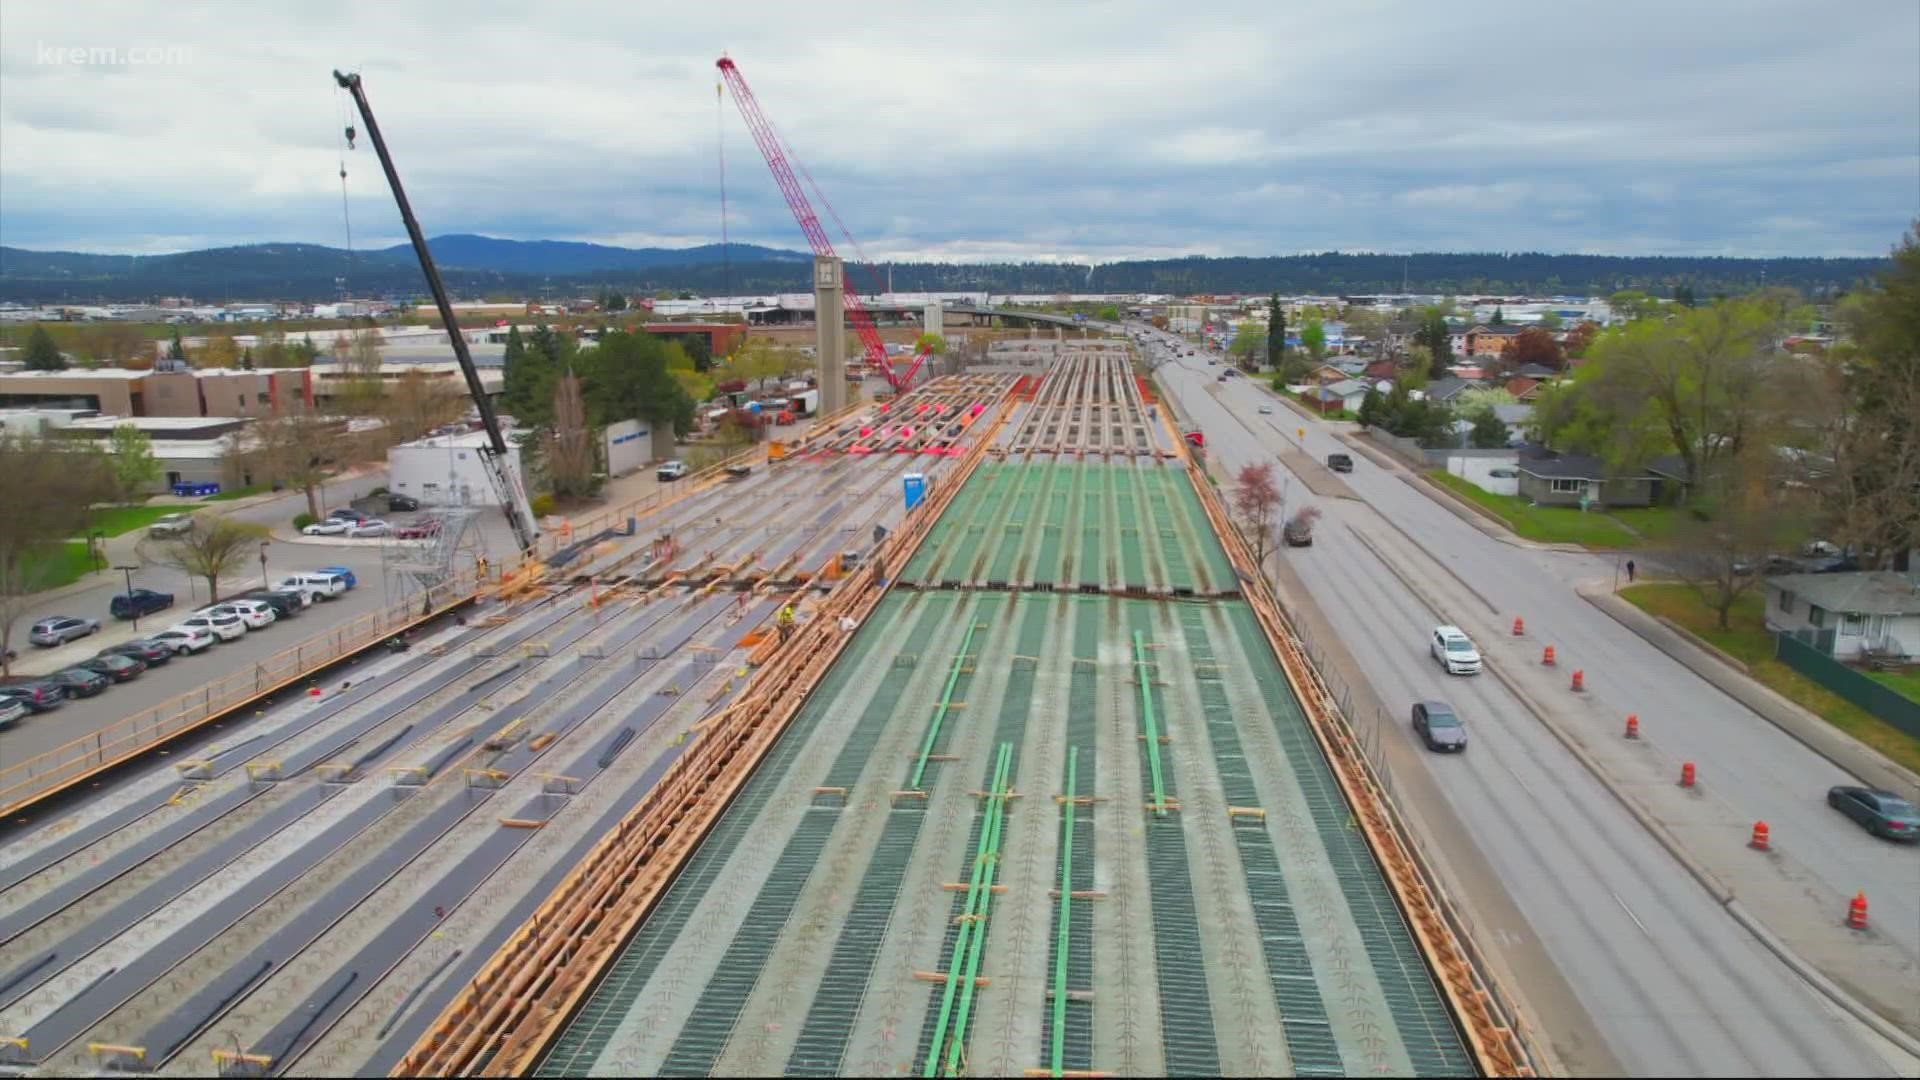 Washington Gov. Jay Inslee is expected to give an update on transportation projects after proposing a delay for the North Spokane Corridor project.